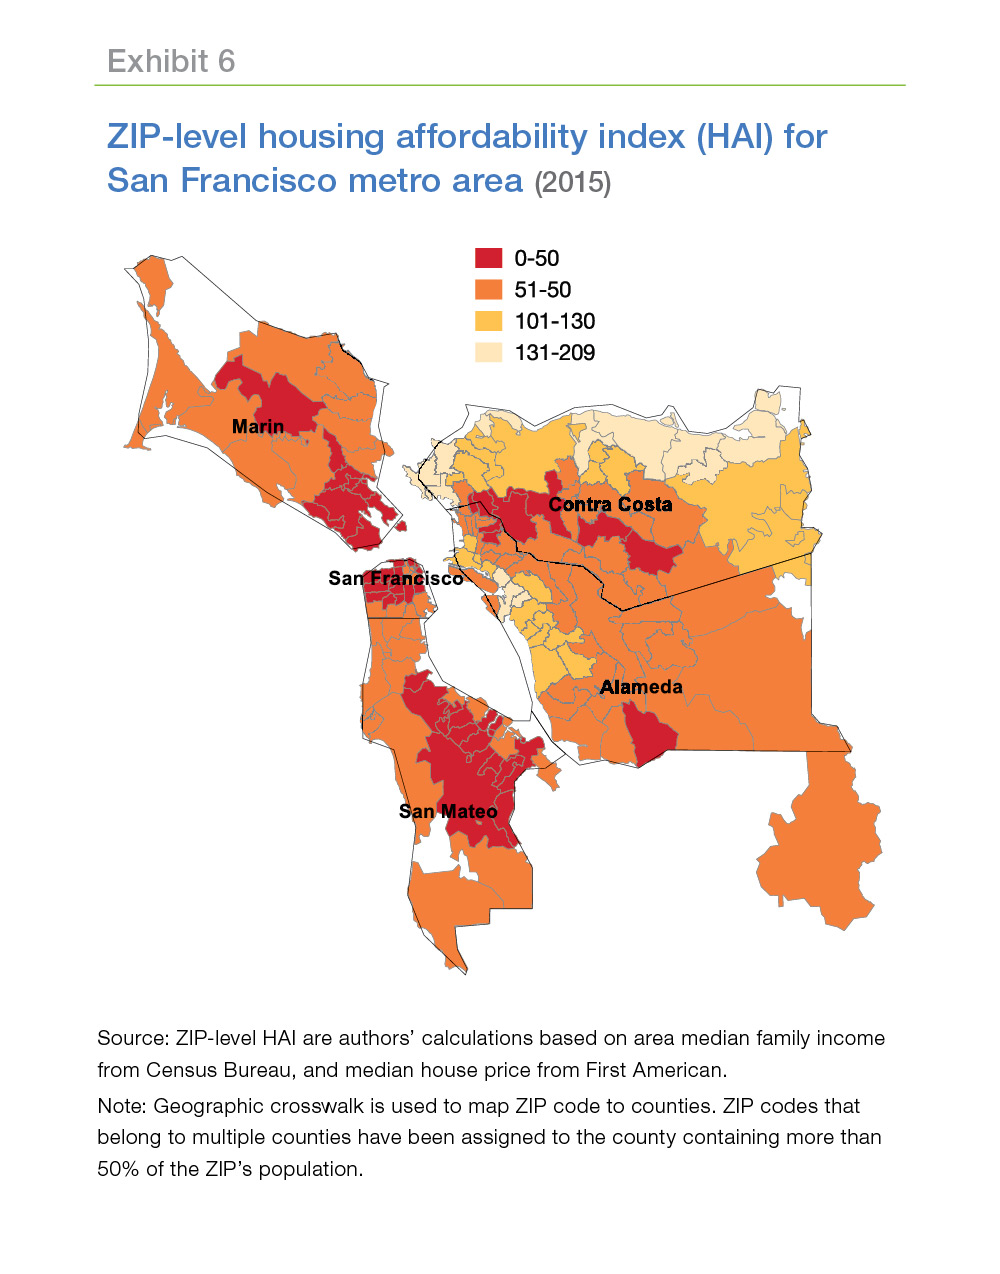 Maps showing ZIP-level housing affordability index (HAI) for San Fransisco metro area (2015)